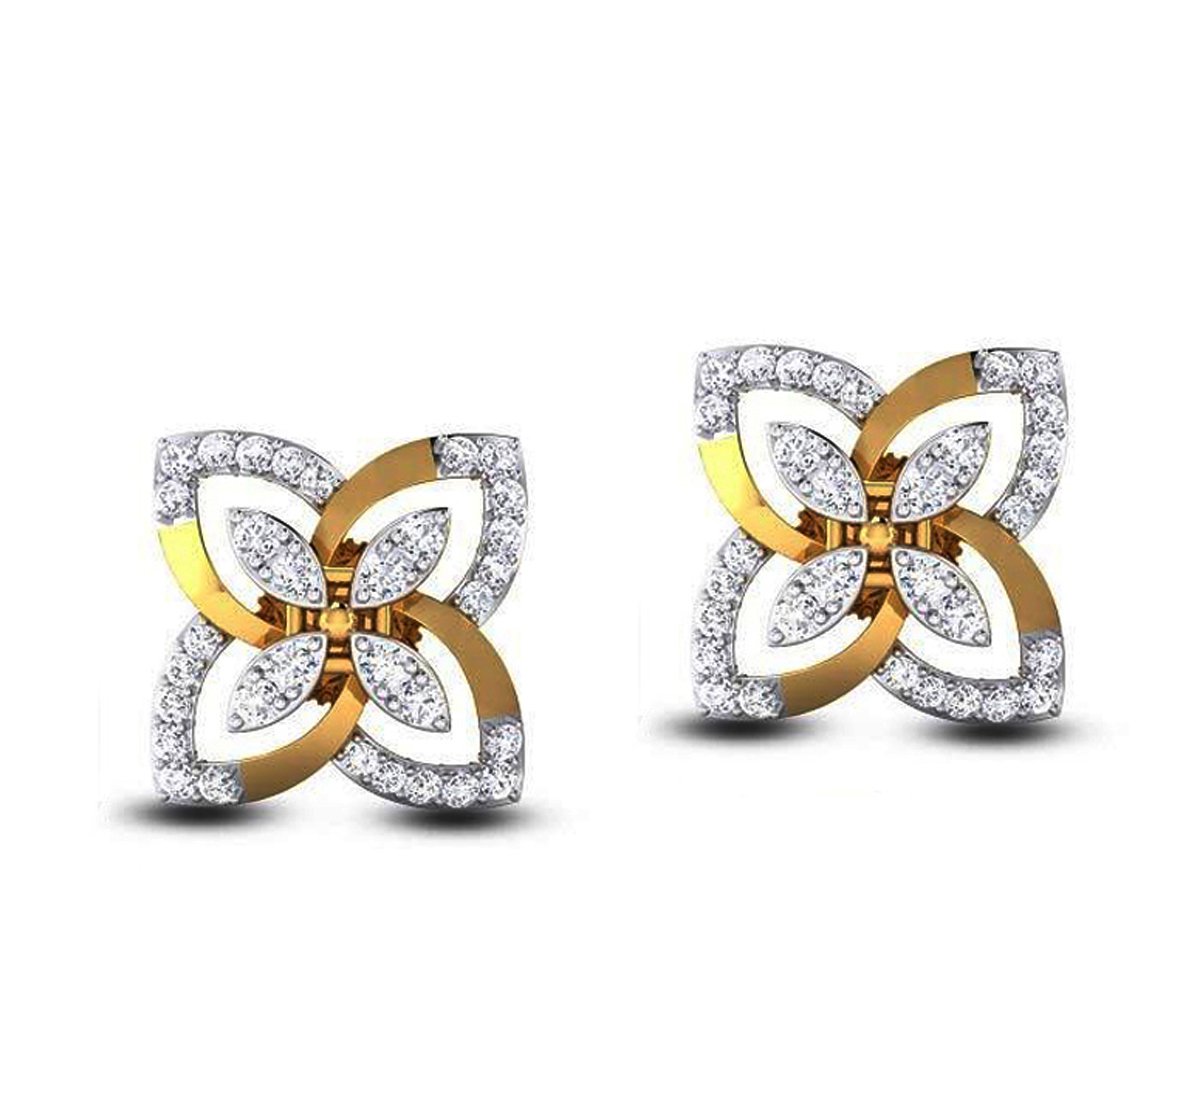 Buy Silver Diamond Earrings with Pearls Online at Jayporecom